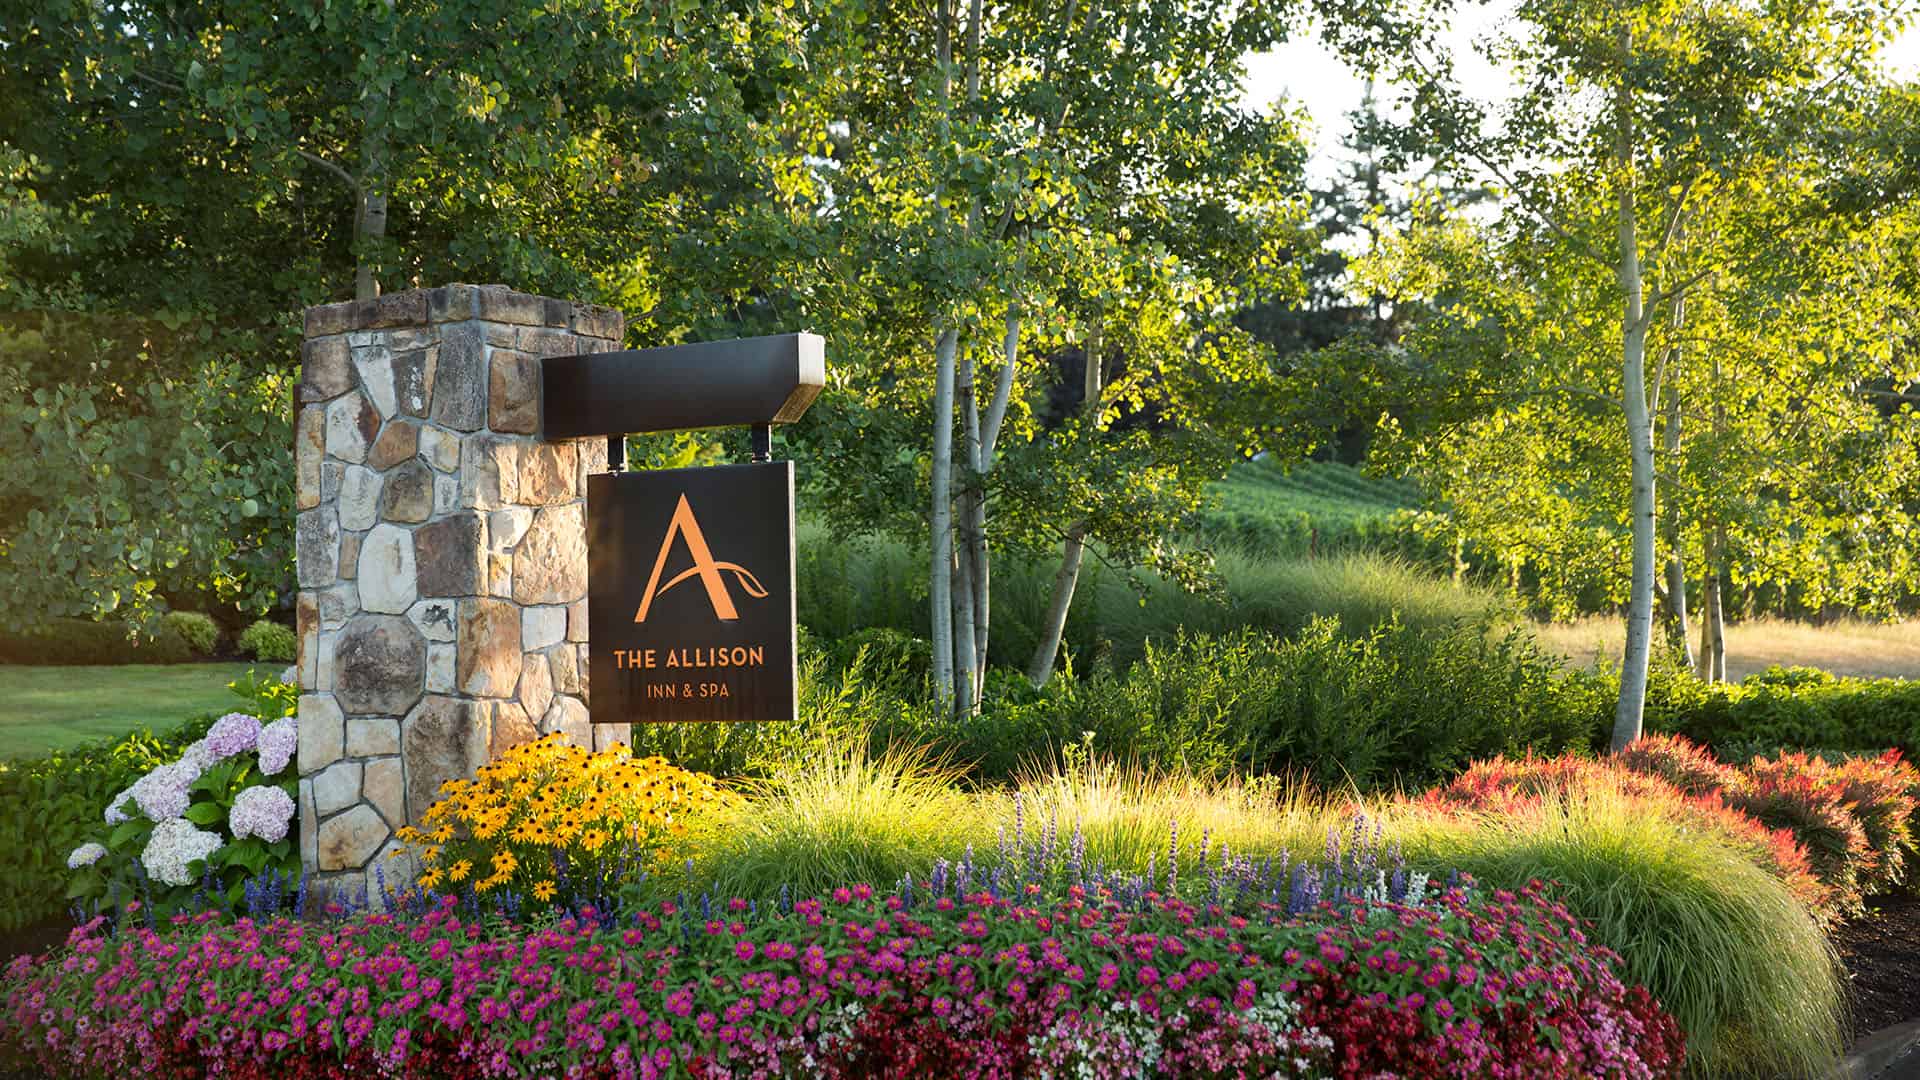 The Allison Inn and Spa Sign With Colorful Flowers